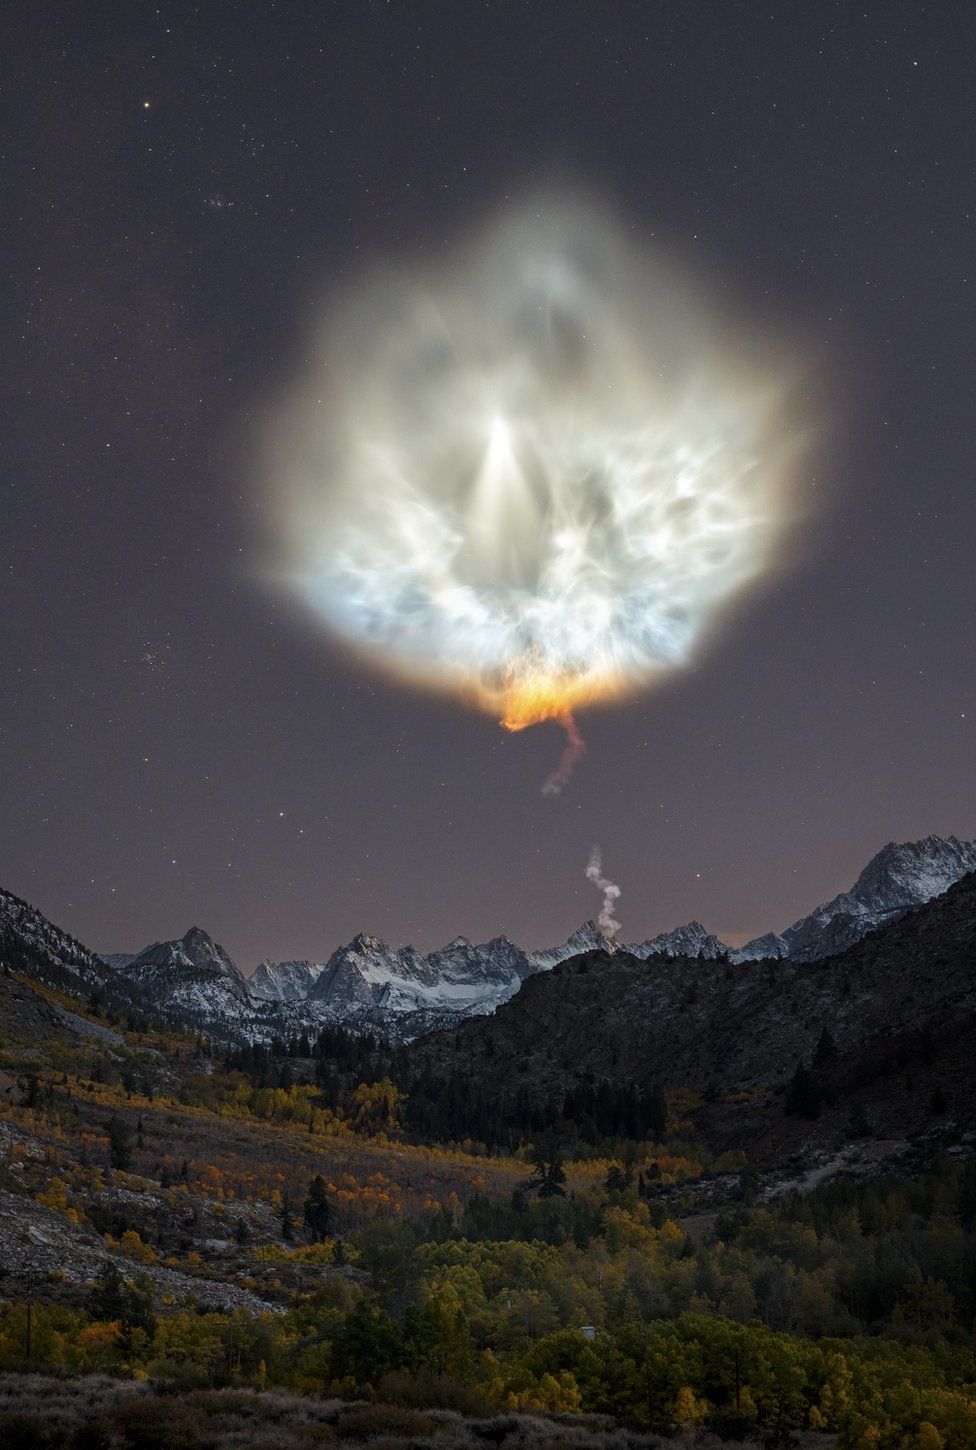 Landscape view of the smoke plume of a rocket, above mountains